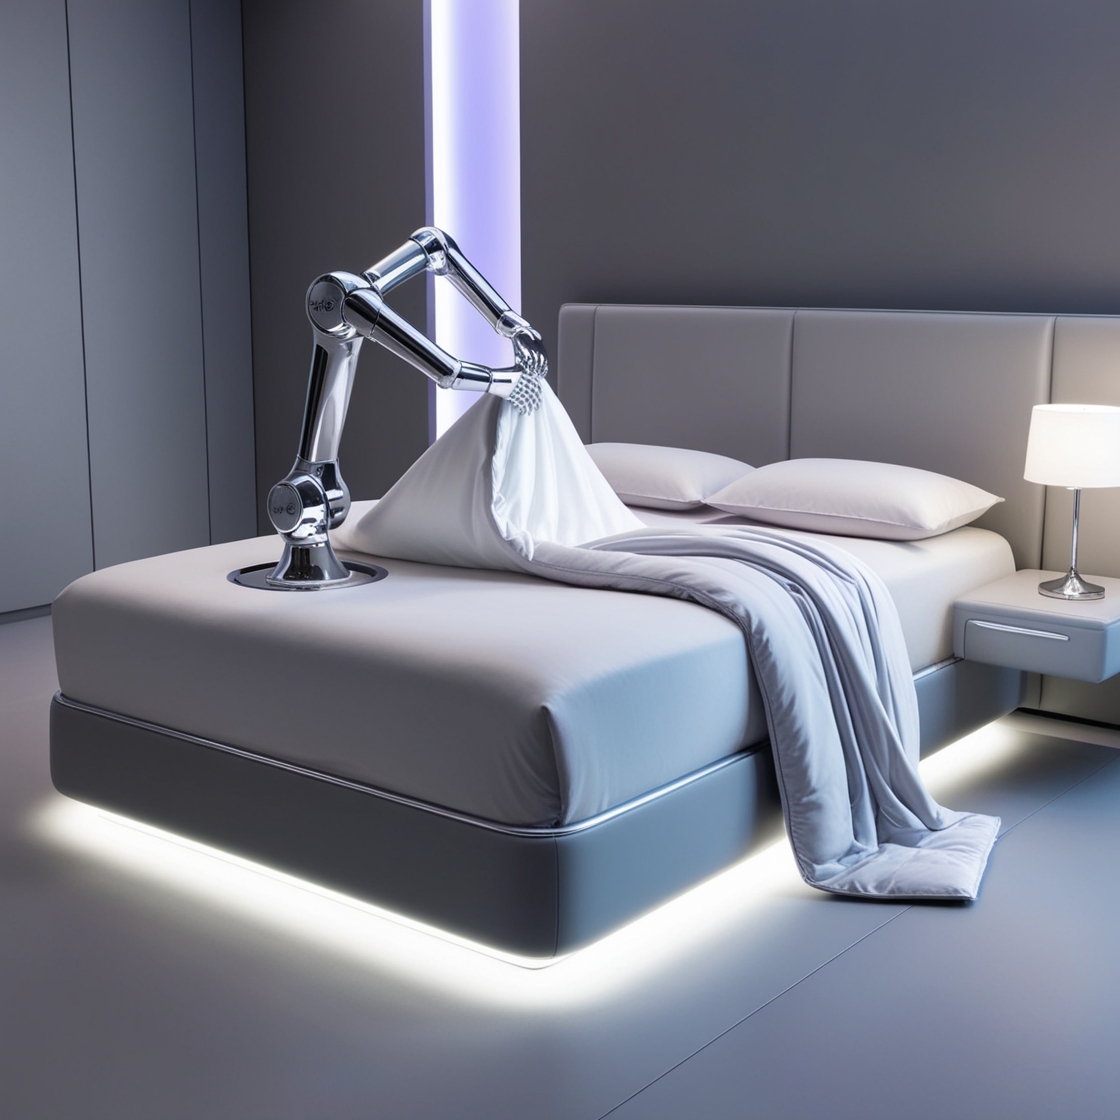 Default_A_futuristic_hightech_bedding_system_rendered_in_3D_di_3.jpg